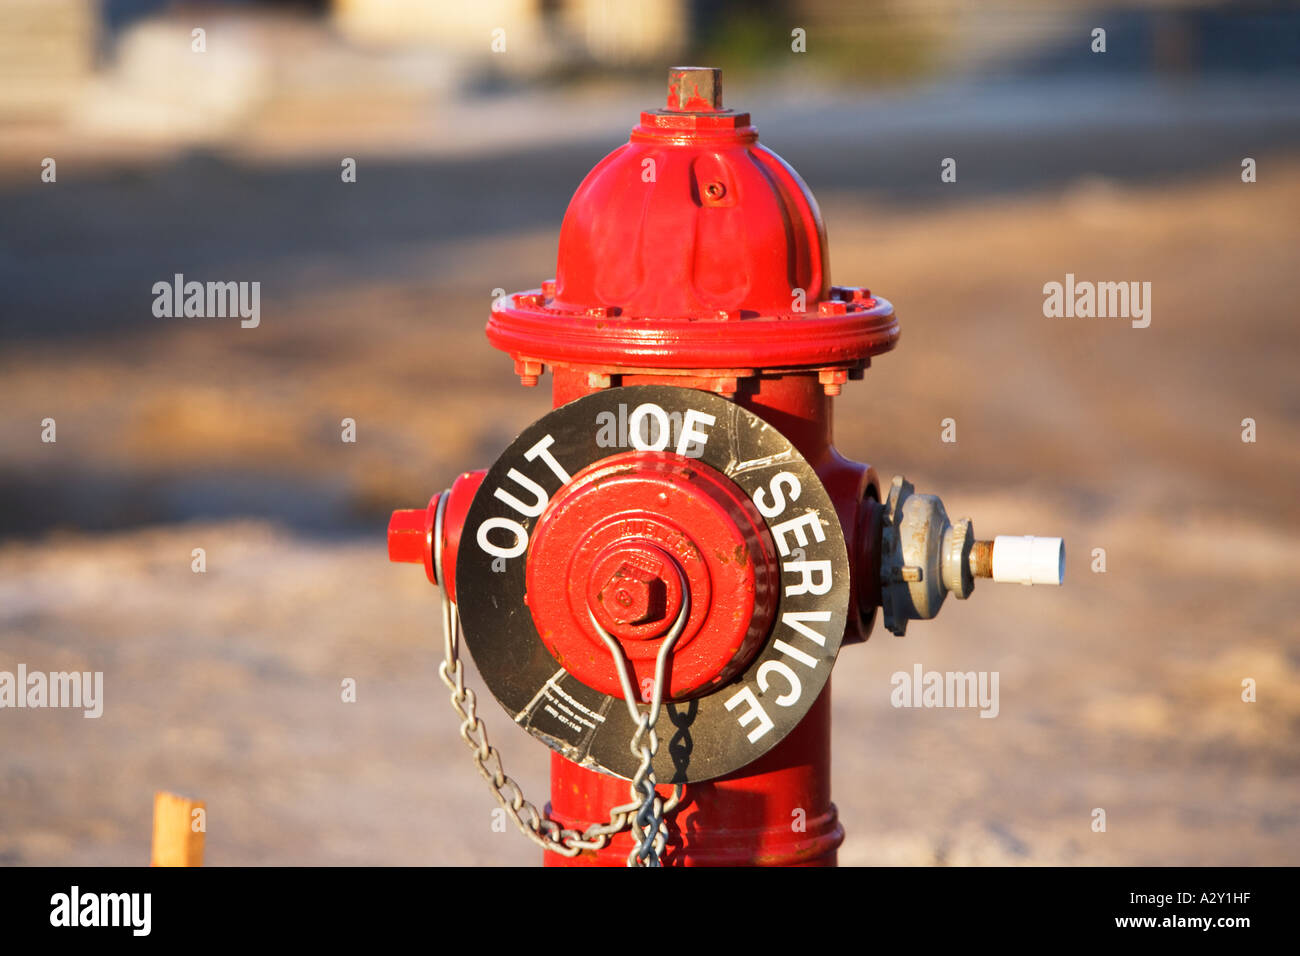 RED FIRE HYDRANT Stockfoto